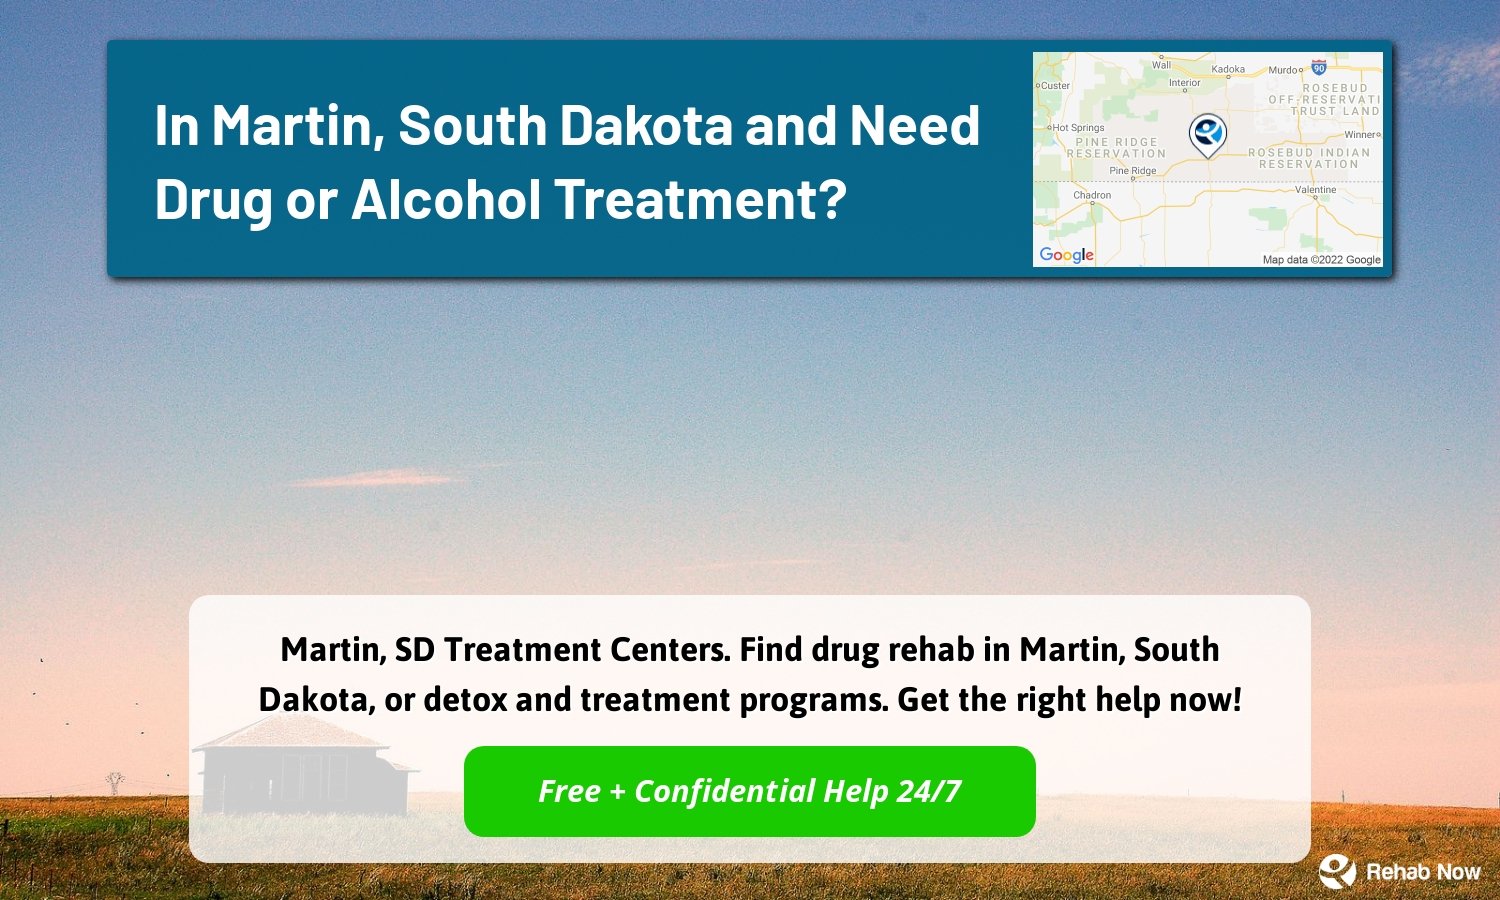 Martin, SD Treatment Centers. Find drug rehab in Martin, South Dakota, or detox and treatment programs. Get the right help now!